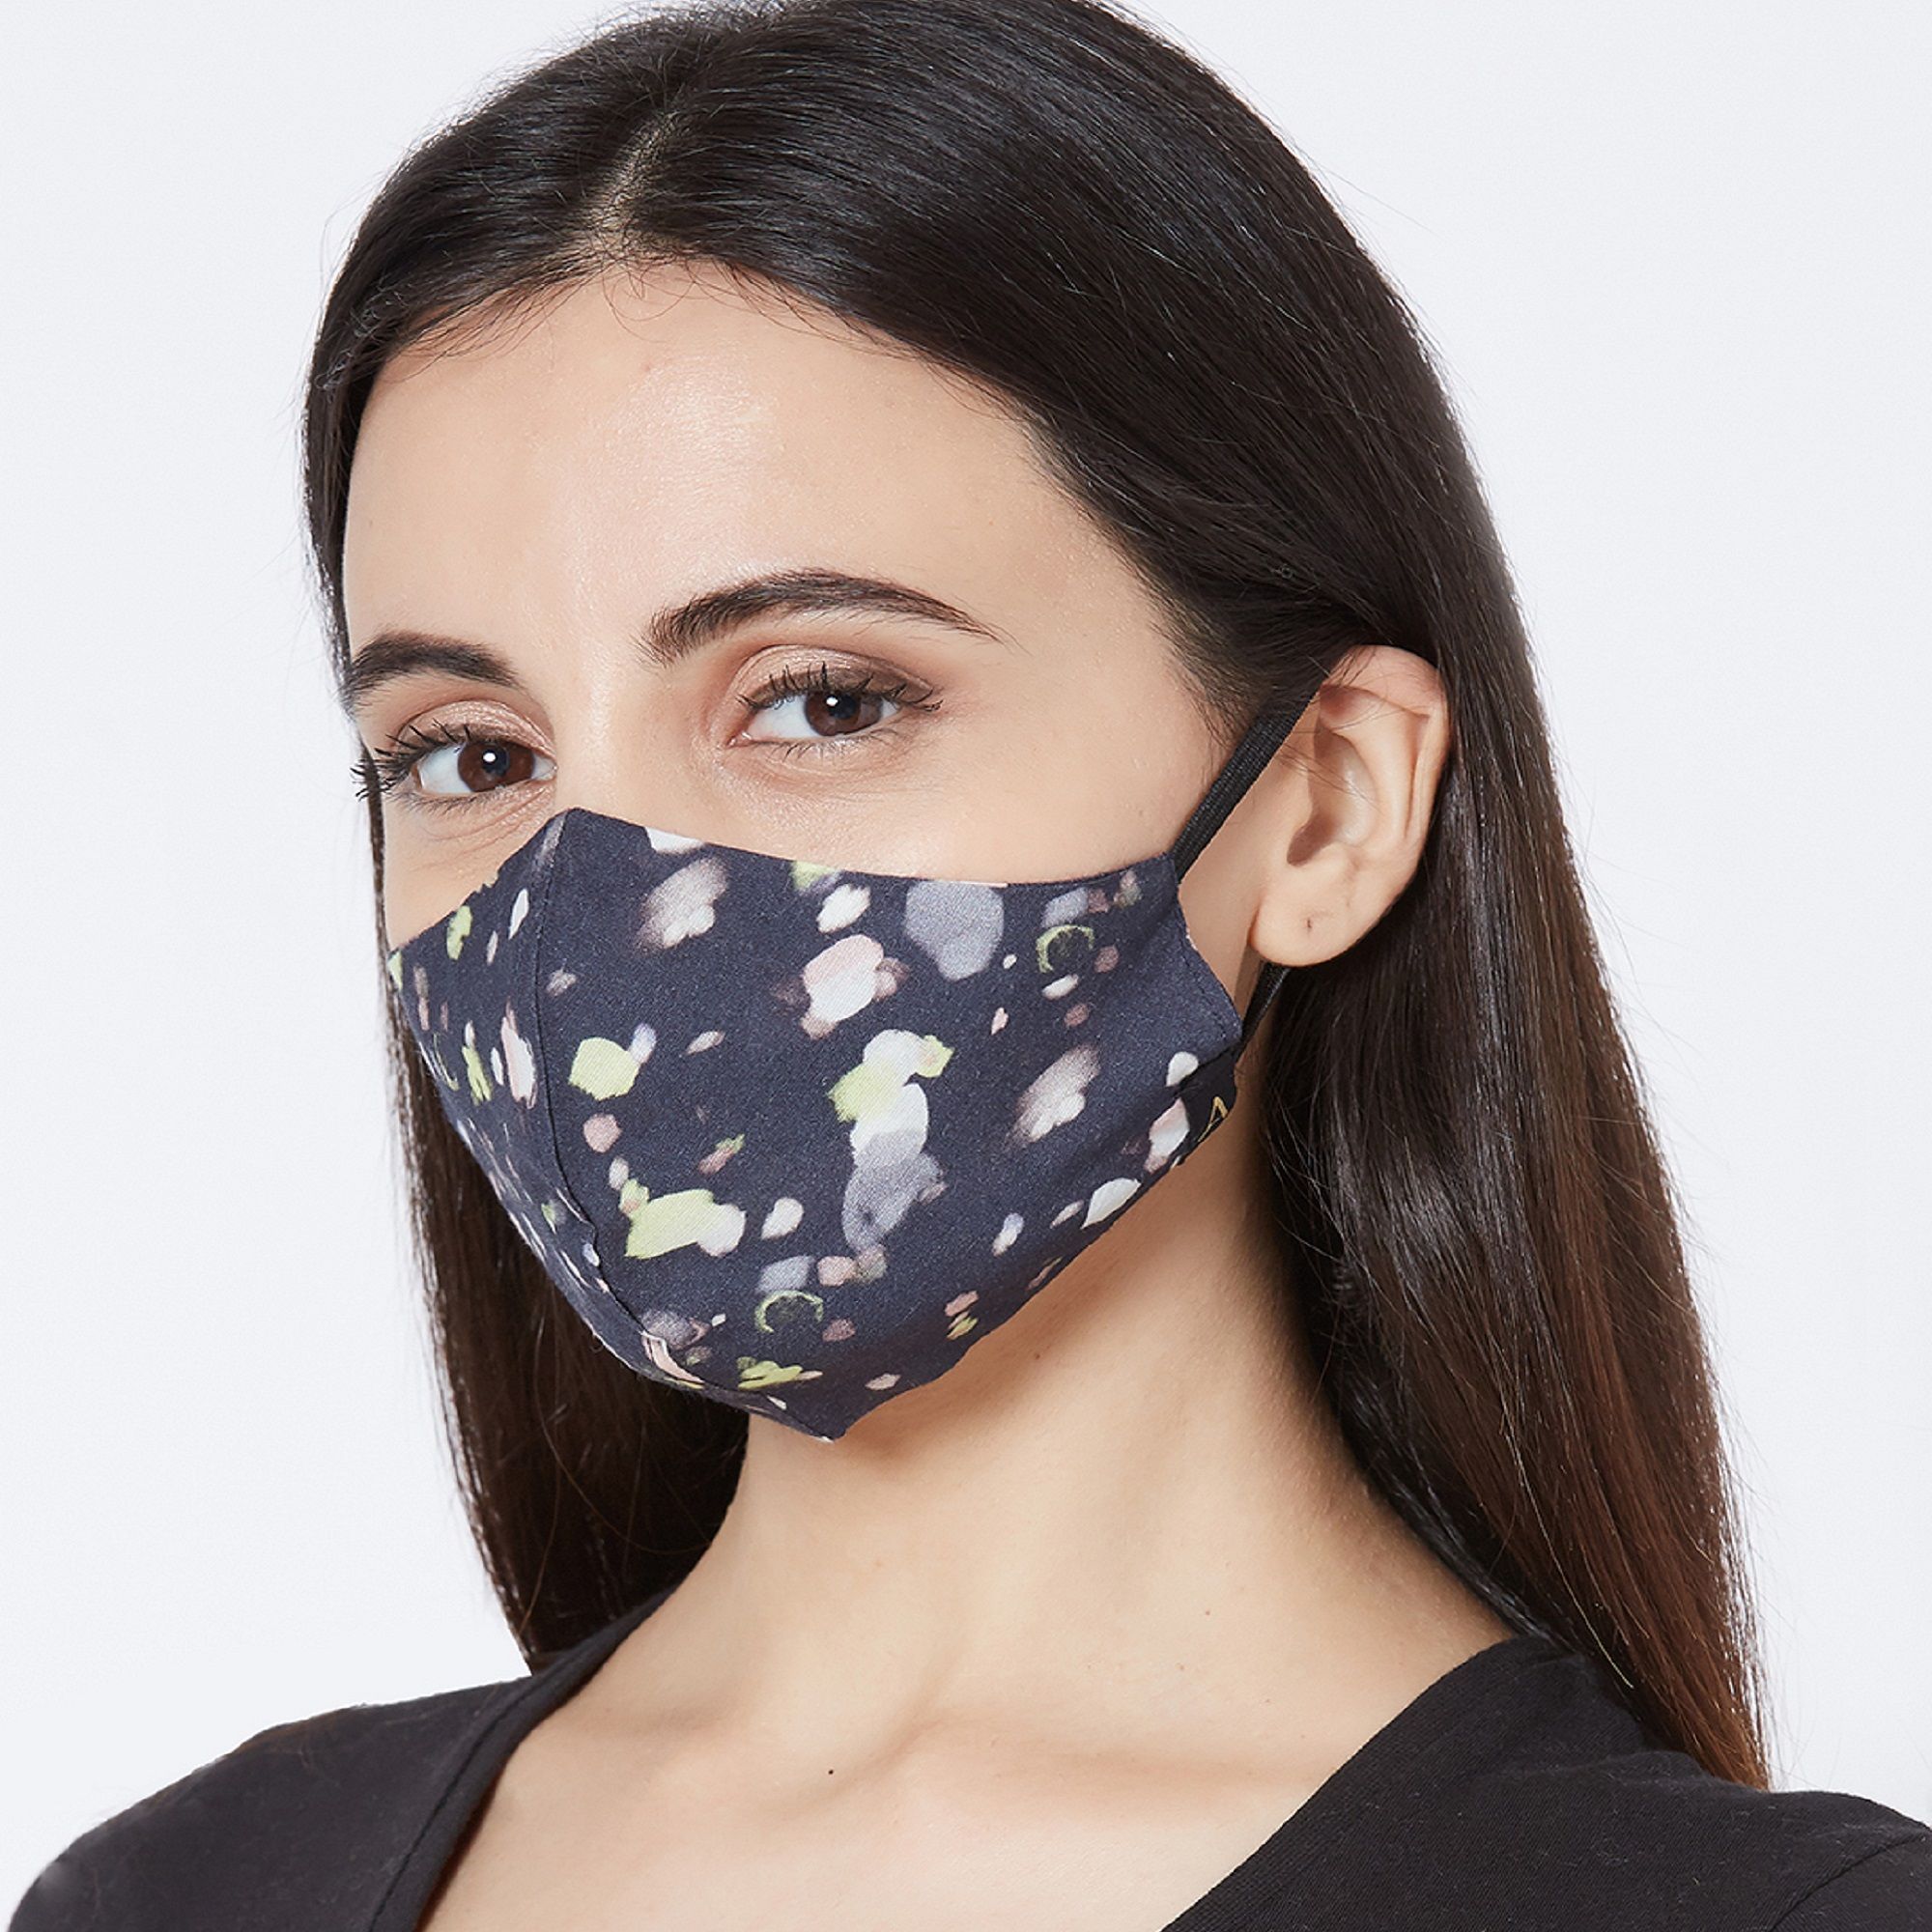 Accessorize London 3 Ply Single Mask: Buy Accessorize London 3 Ply Single Cotton Mask Online at Best Price in India | Nykaa